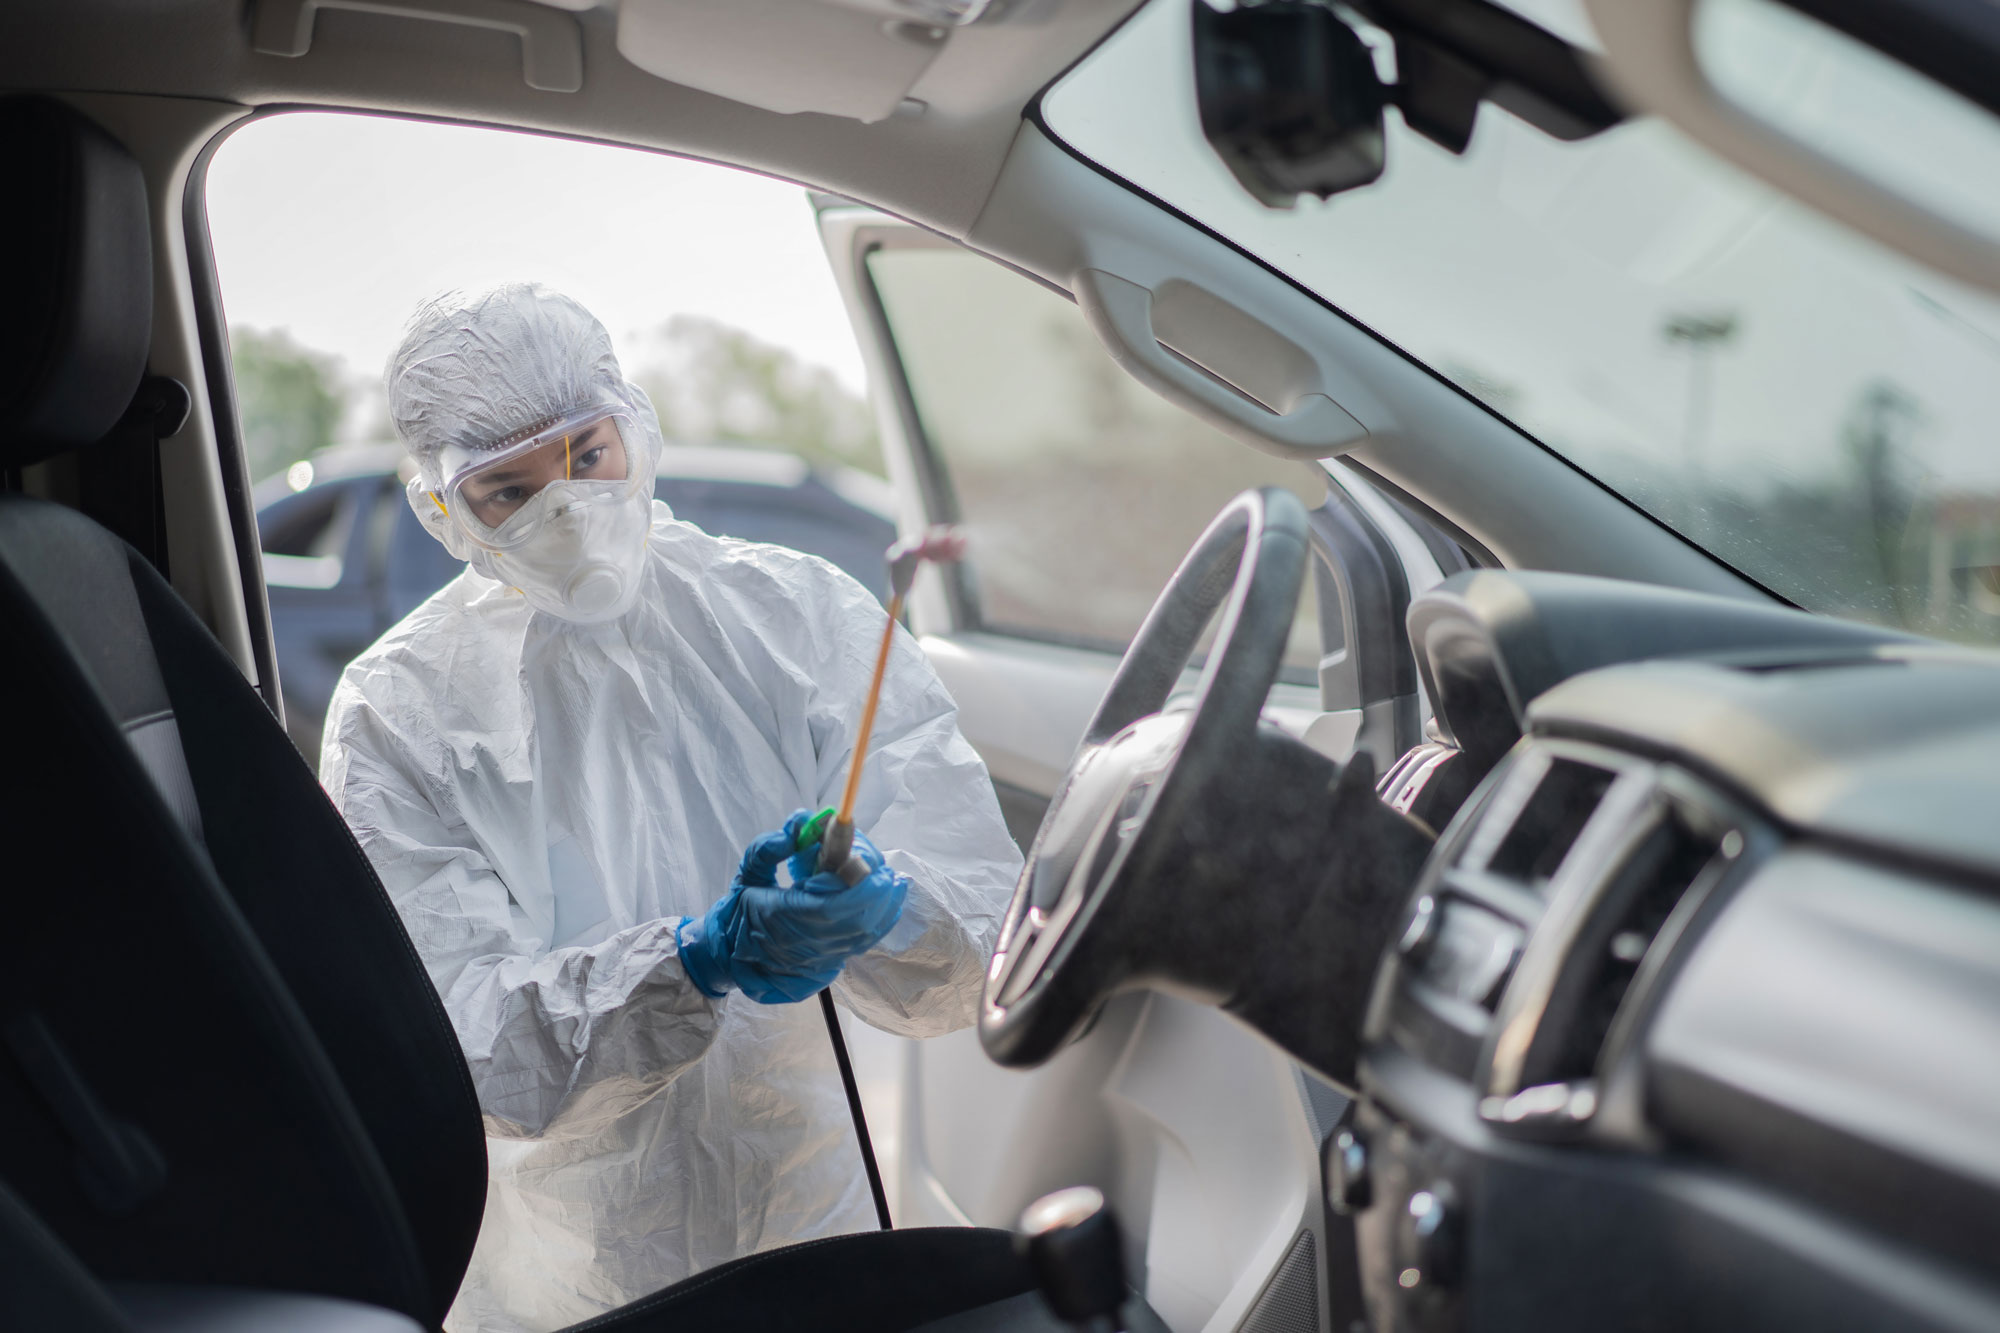 DISINFECTION OF CARS AGAINST SARS-CoV-2